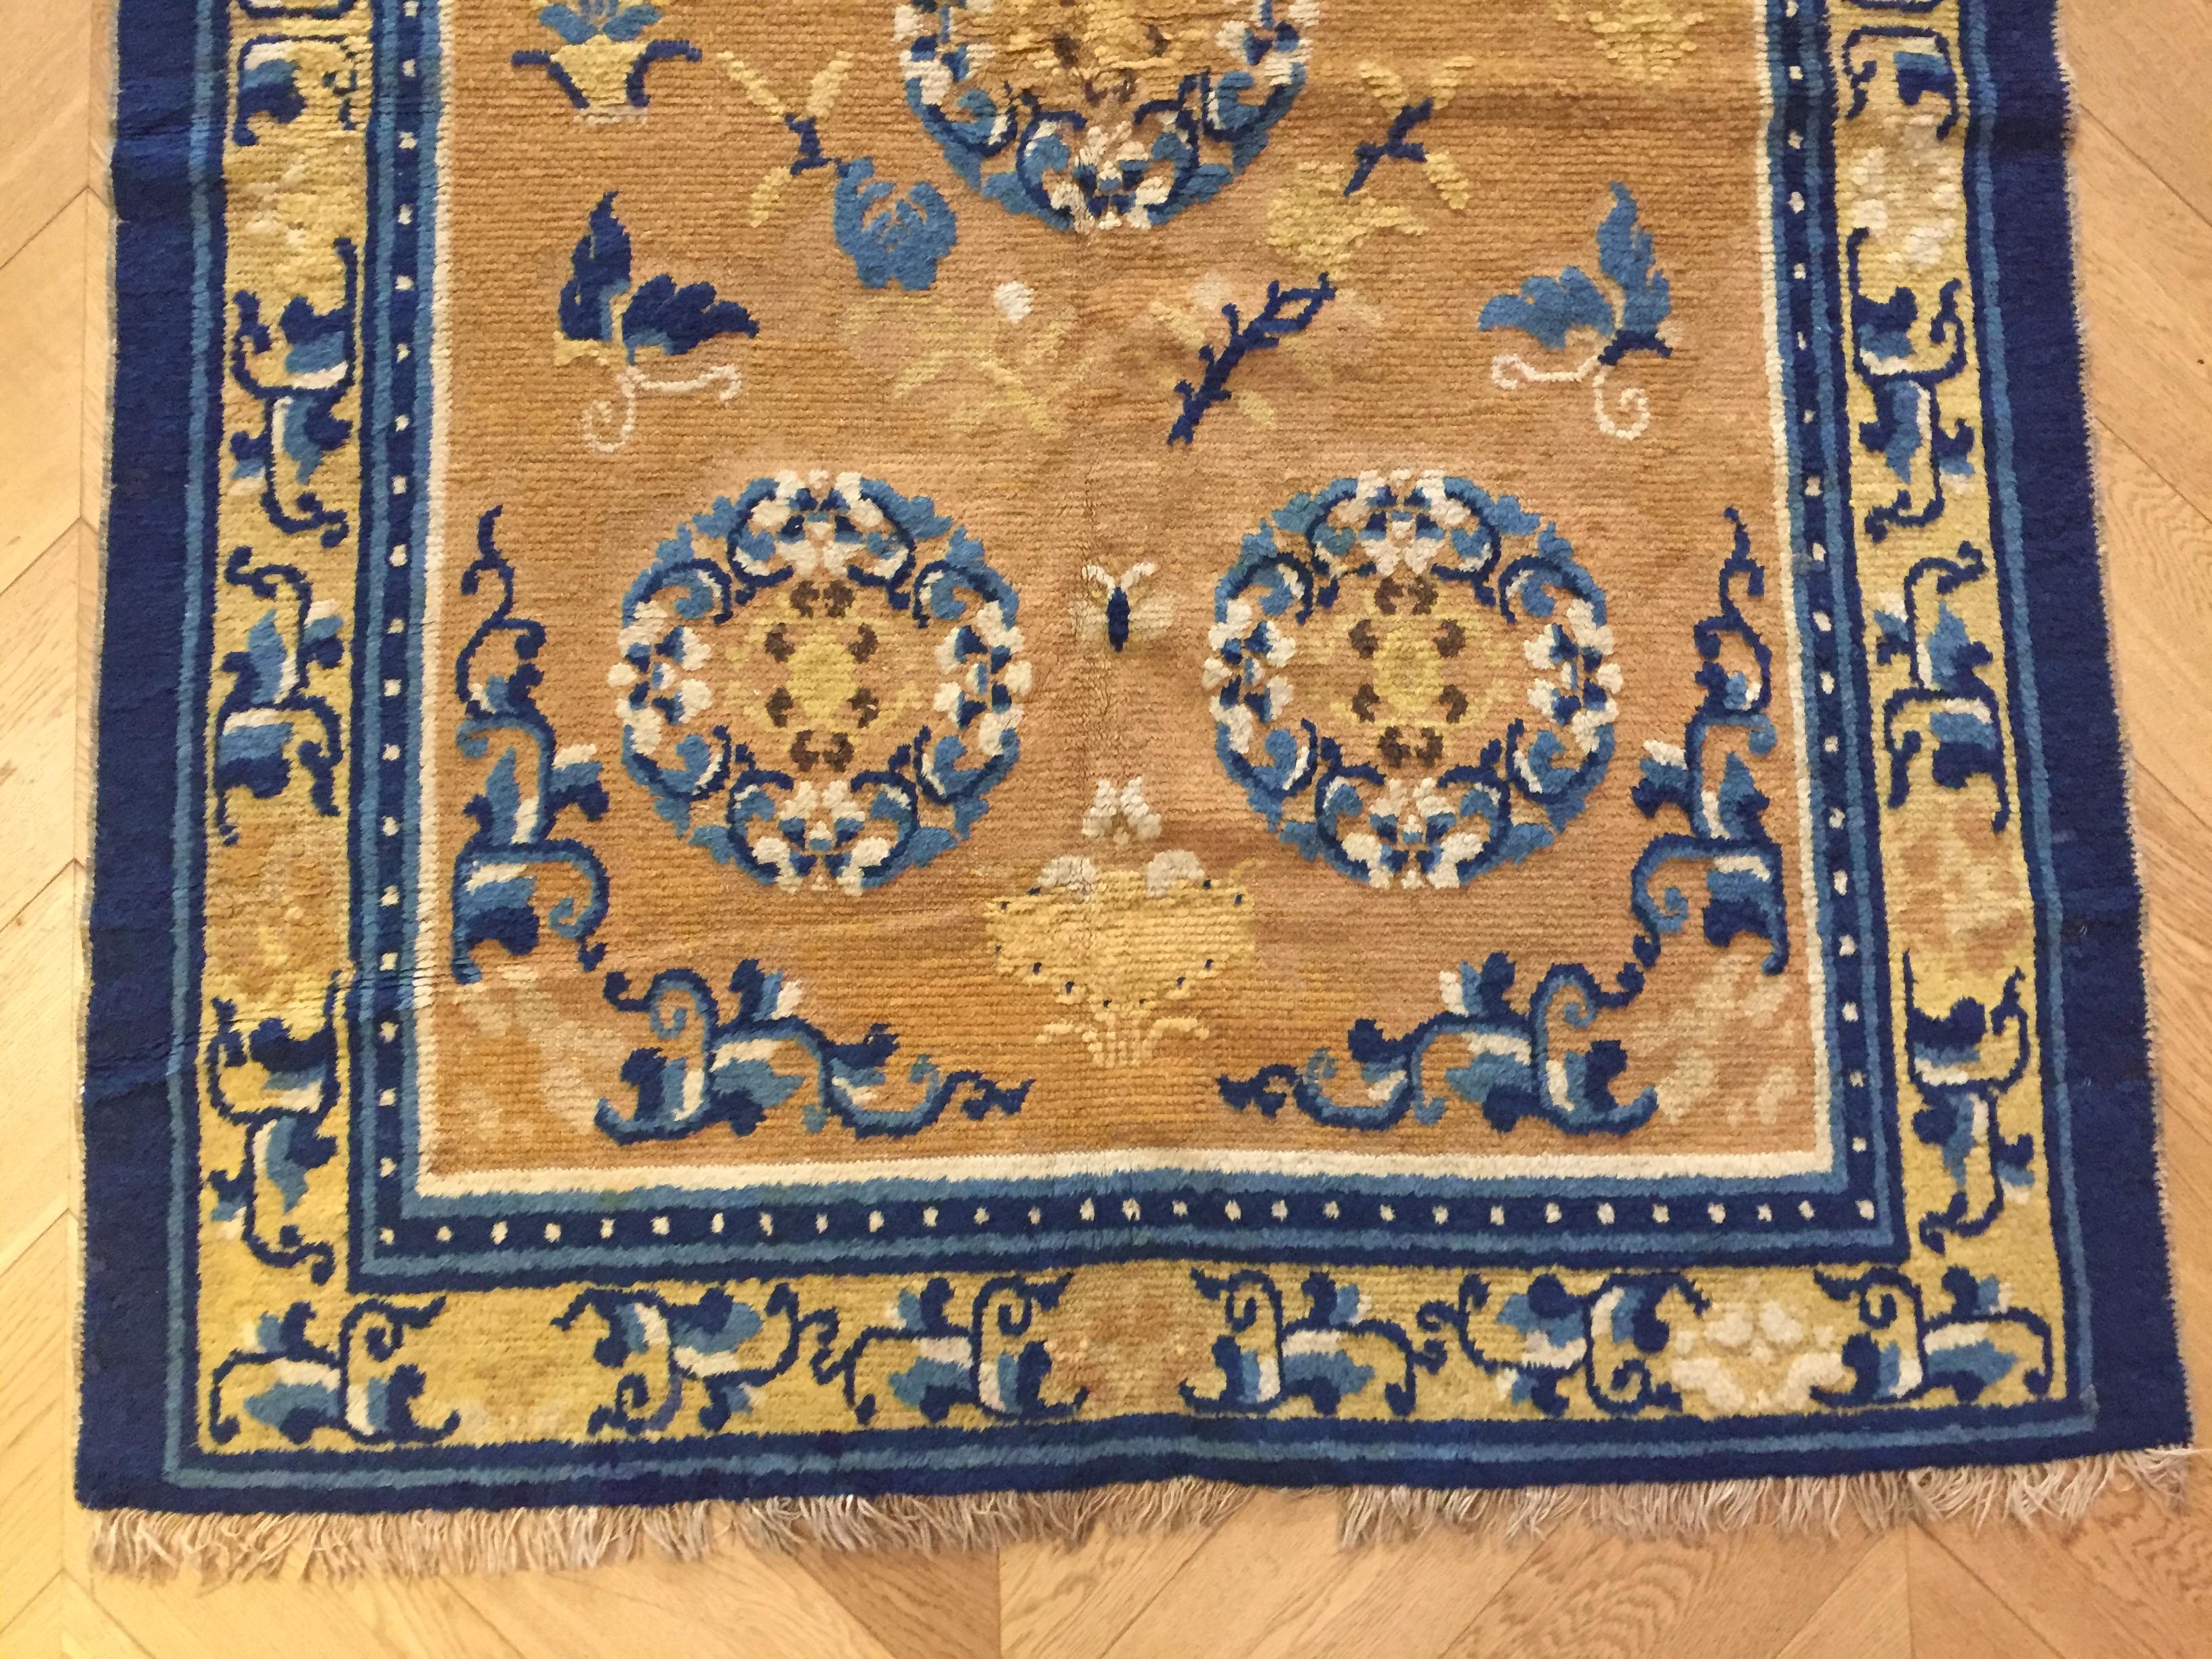 Chinoiserie 19th Century Chinese Ninxia Ocher Yellow Rug Fine Hand Knotted, Cotton and Wool For Sale